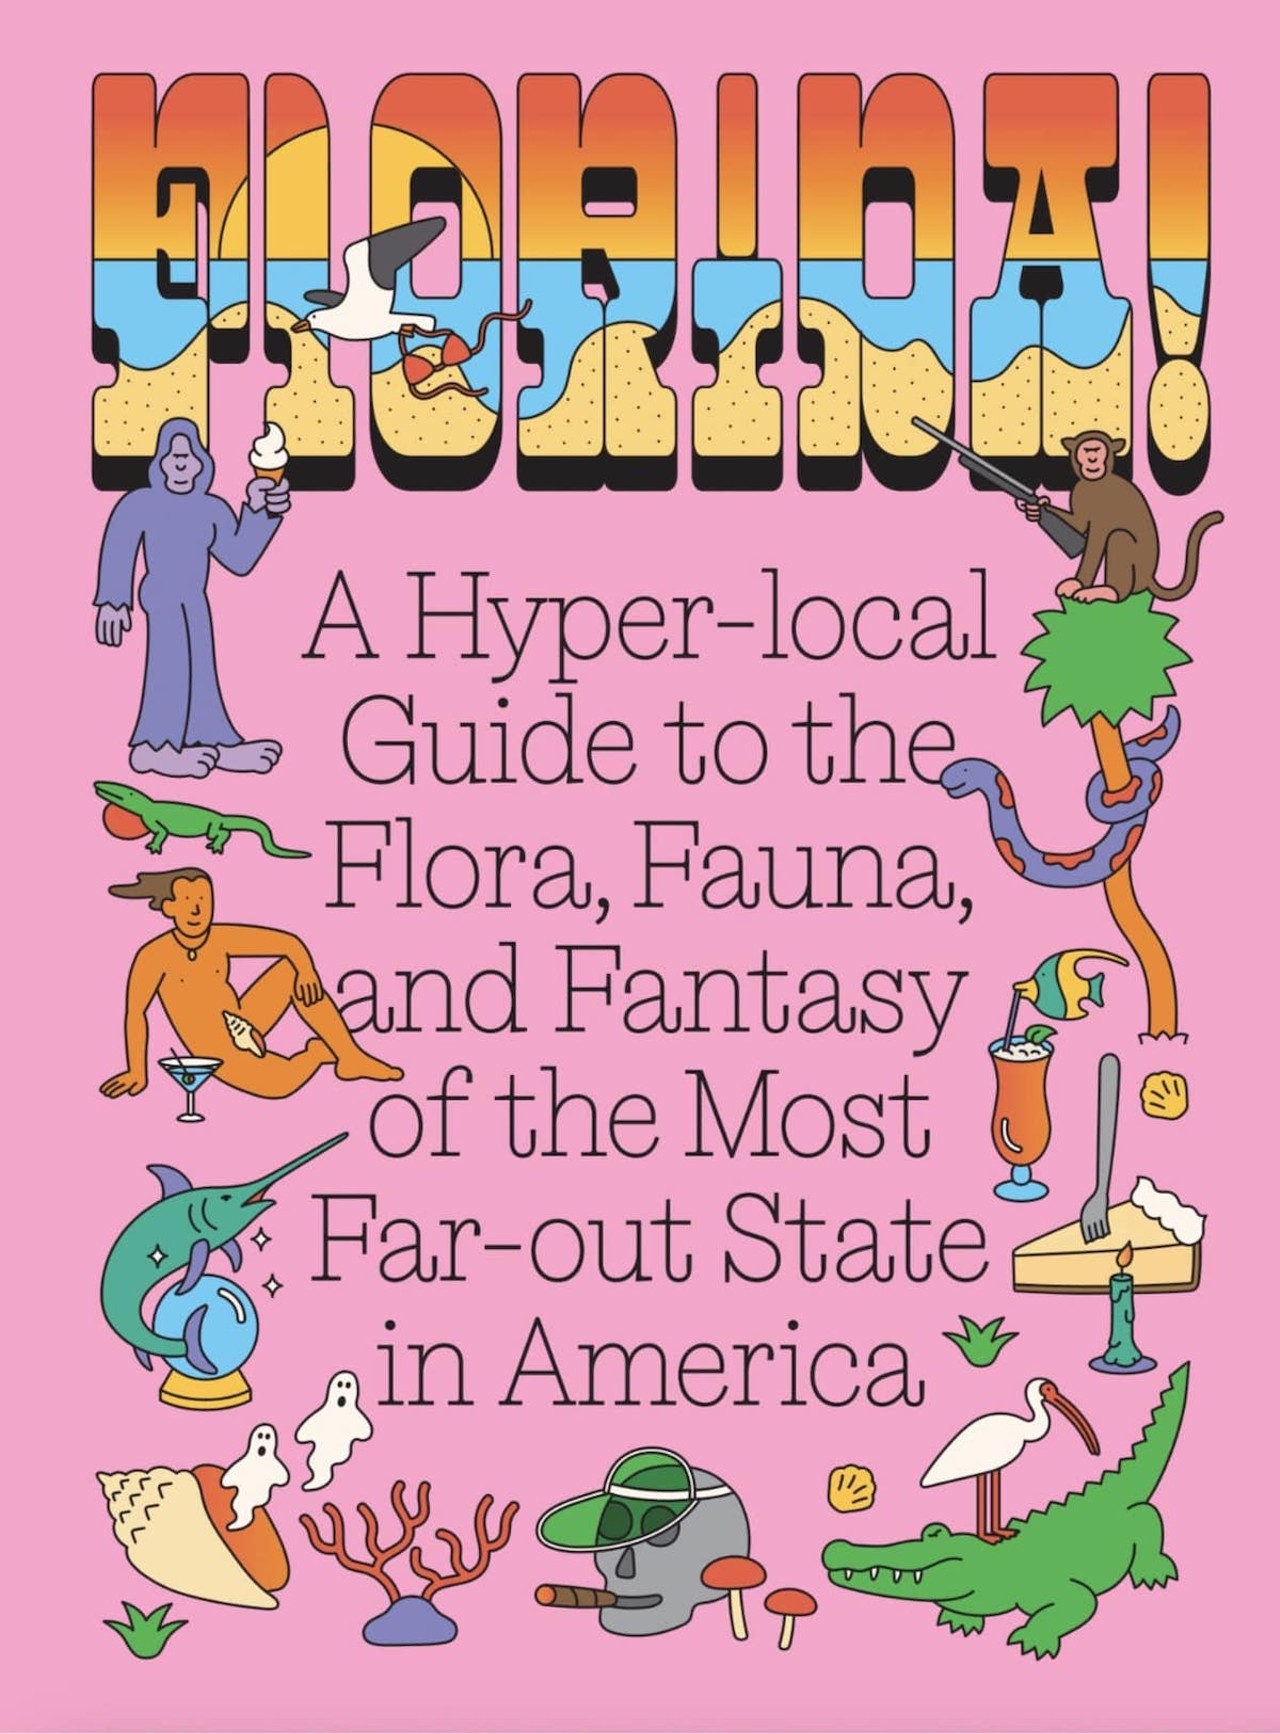 Florida! A hyper-local guide to the Flora, Fauna, and Fantasy of the Most Far-out State in America by Gabrielle Calise
A nearly 600-page bible with a puffy, pale-almost-pastel-pink cover that’s almost soft enough to sleep on after the second bottle of wine you had because you didn’t want to stop reading the damn thing.
The book—published by A24, which brought the state into homes via films like “The Florida Project,” “Zola” and “Spring Breakers”—can be used as a road trip planner, but is a trip in itself.
FFO: A24, sleeping on beaches and getting lost taking the backroads (A24, $50)
